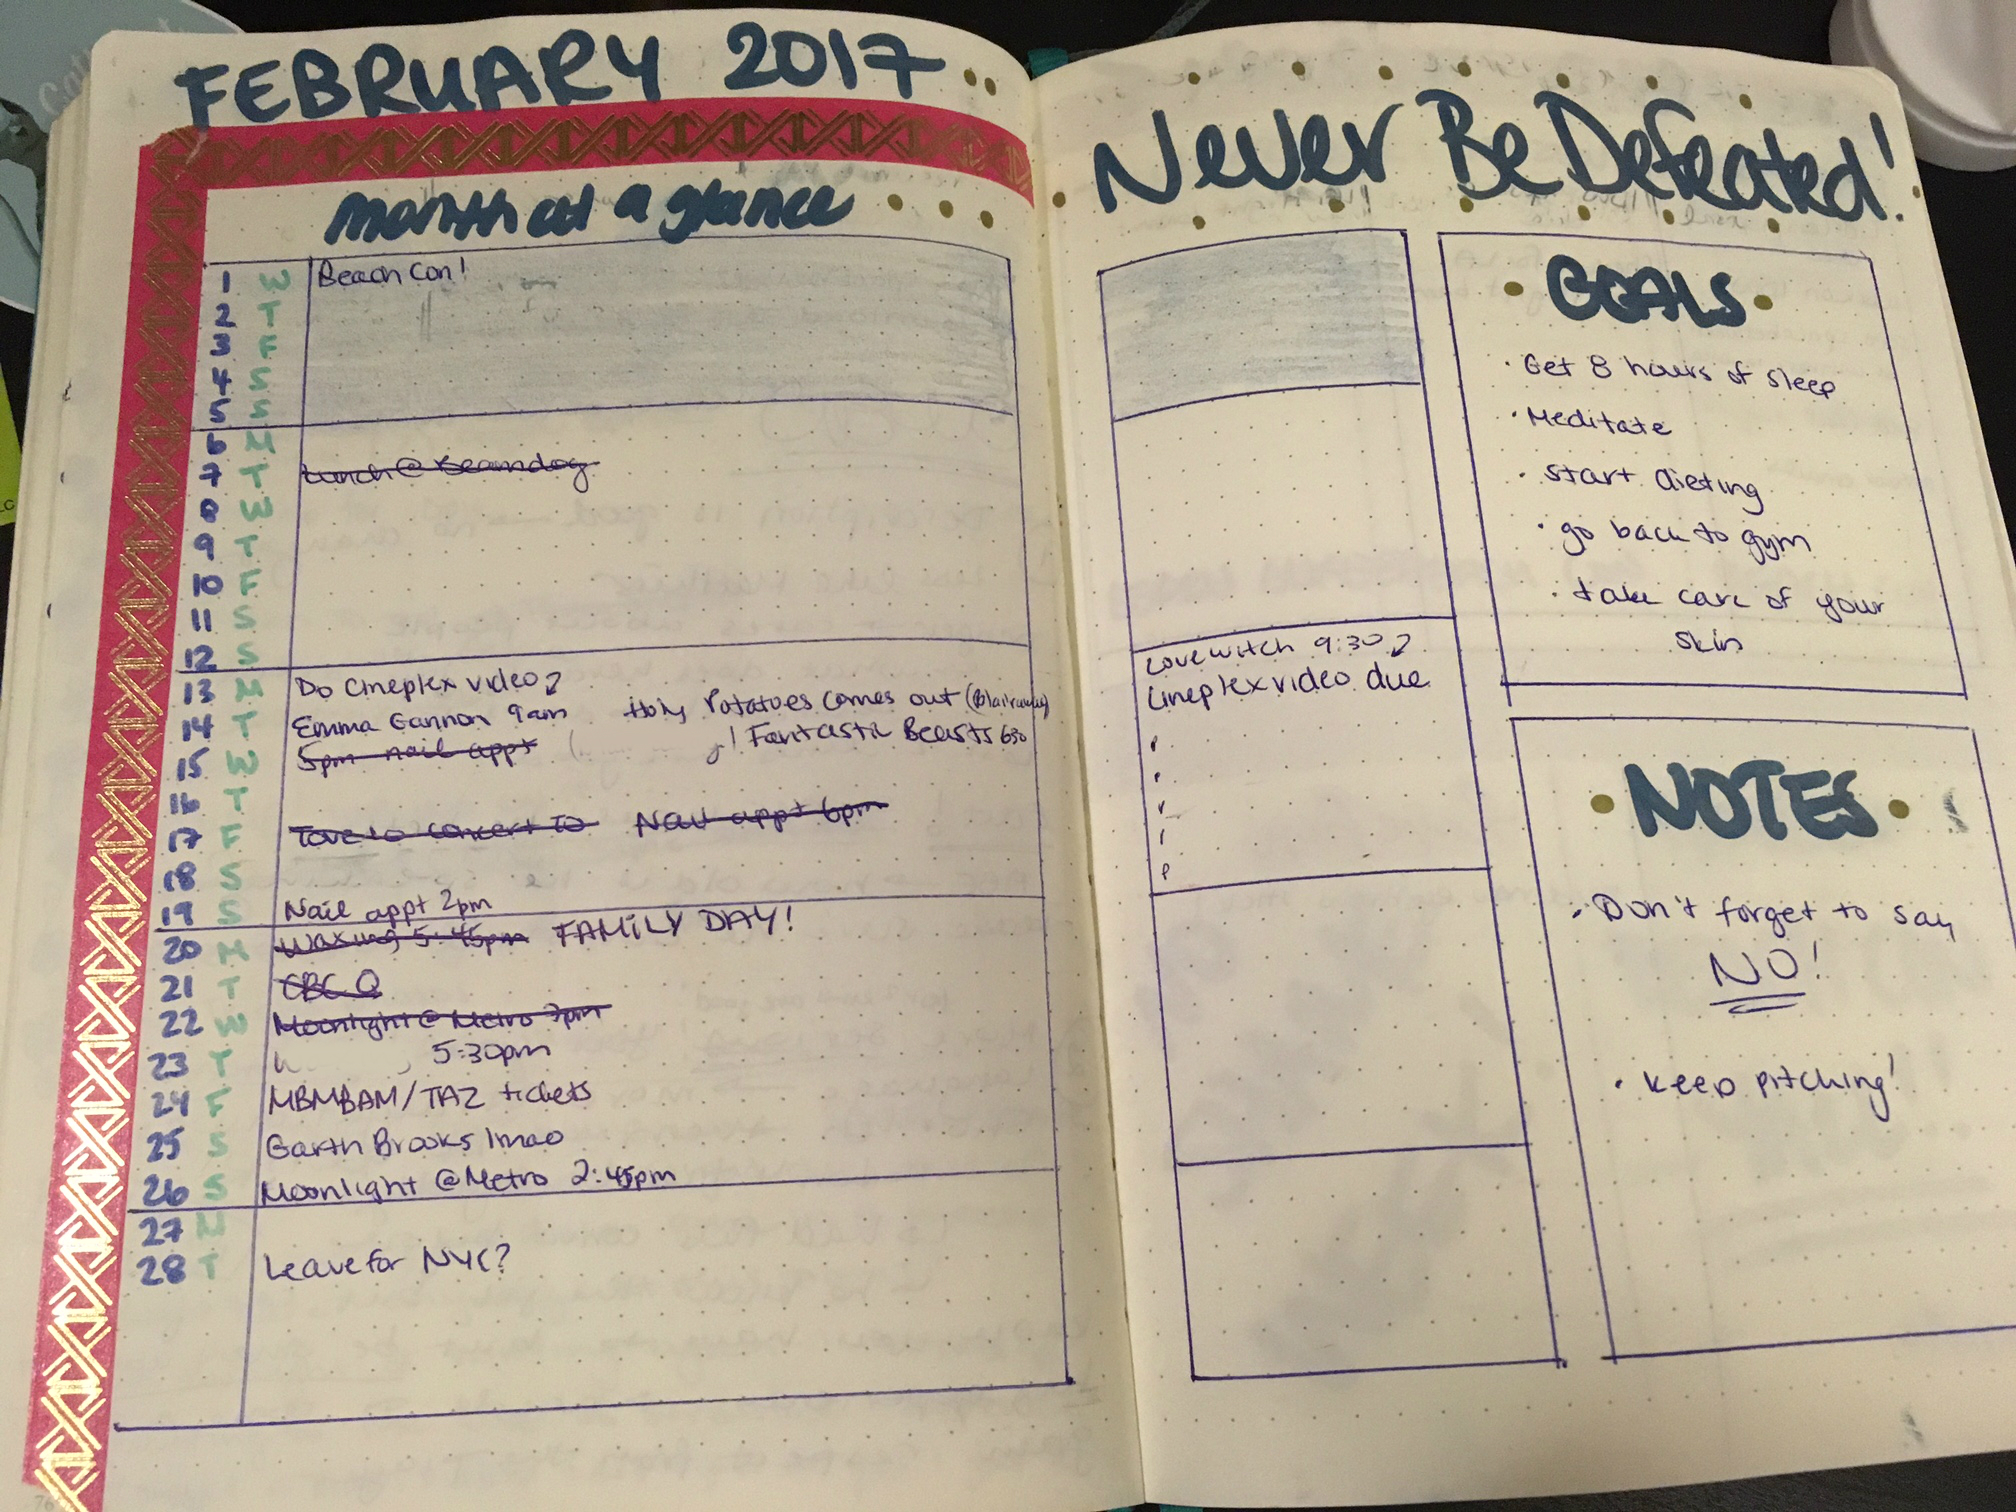 Bullet journaling here to stay - The Aggie